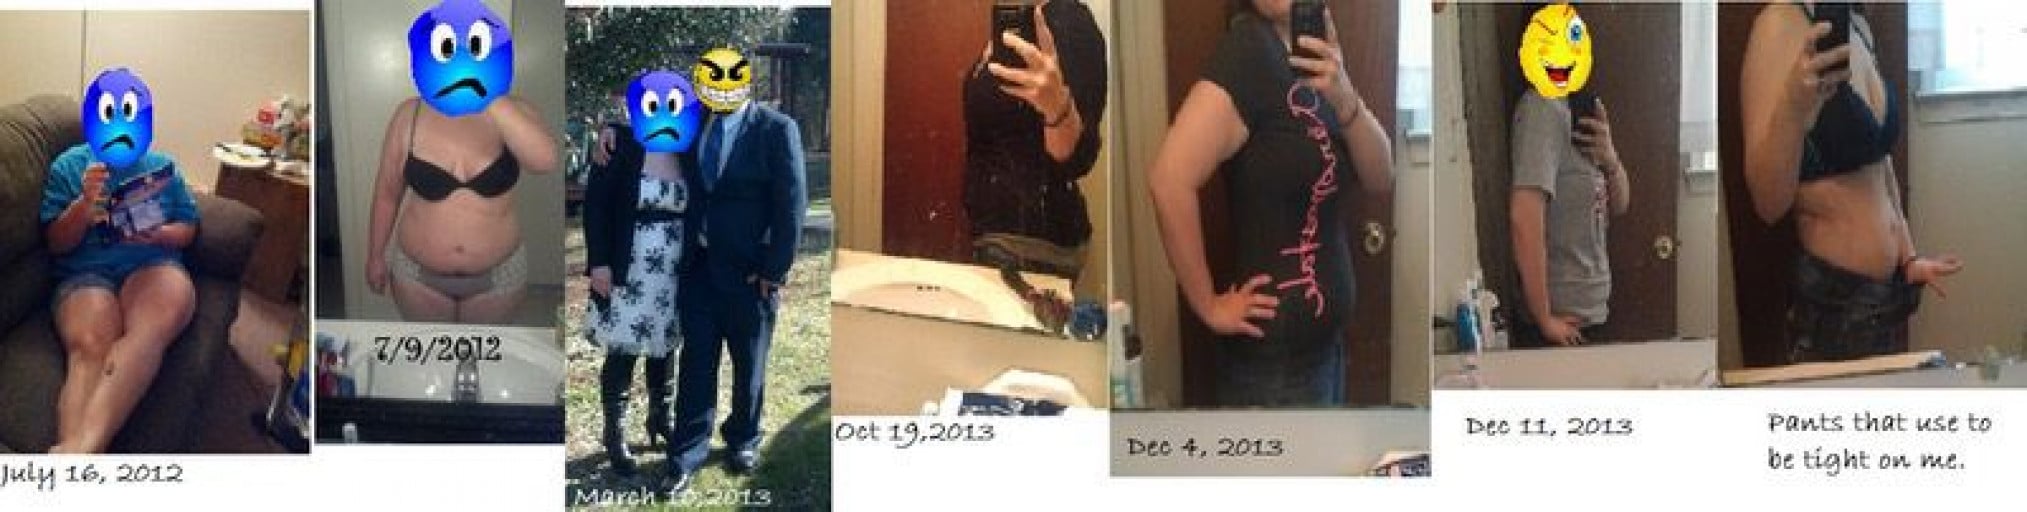 A photo of a 5'3" woman showing a weight cut from 210 pounds to 155 pounds. A total loss of 55 pounds.